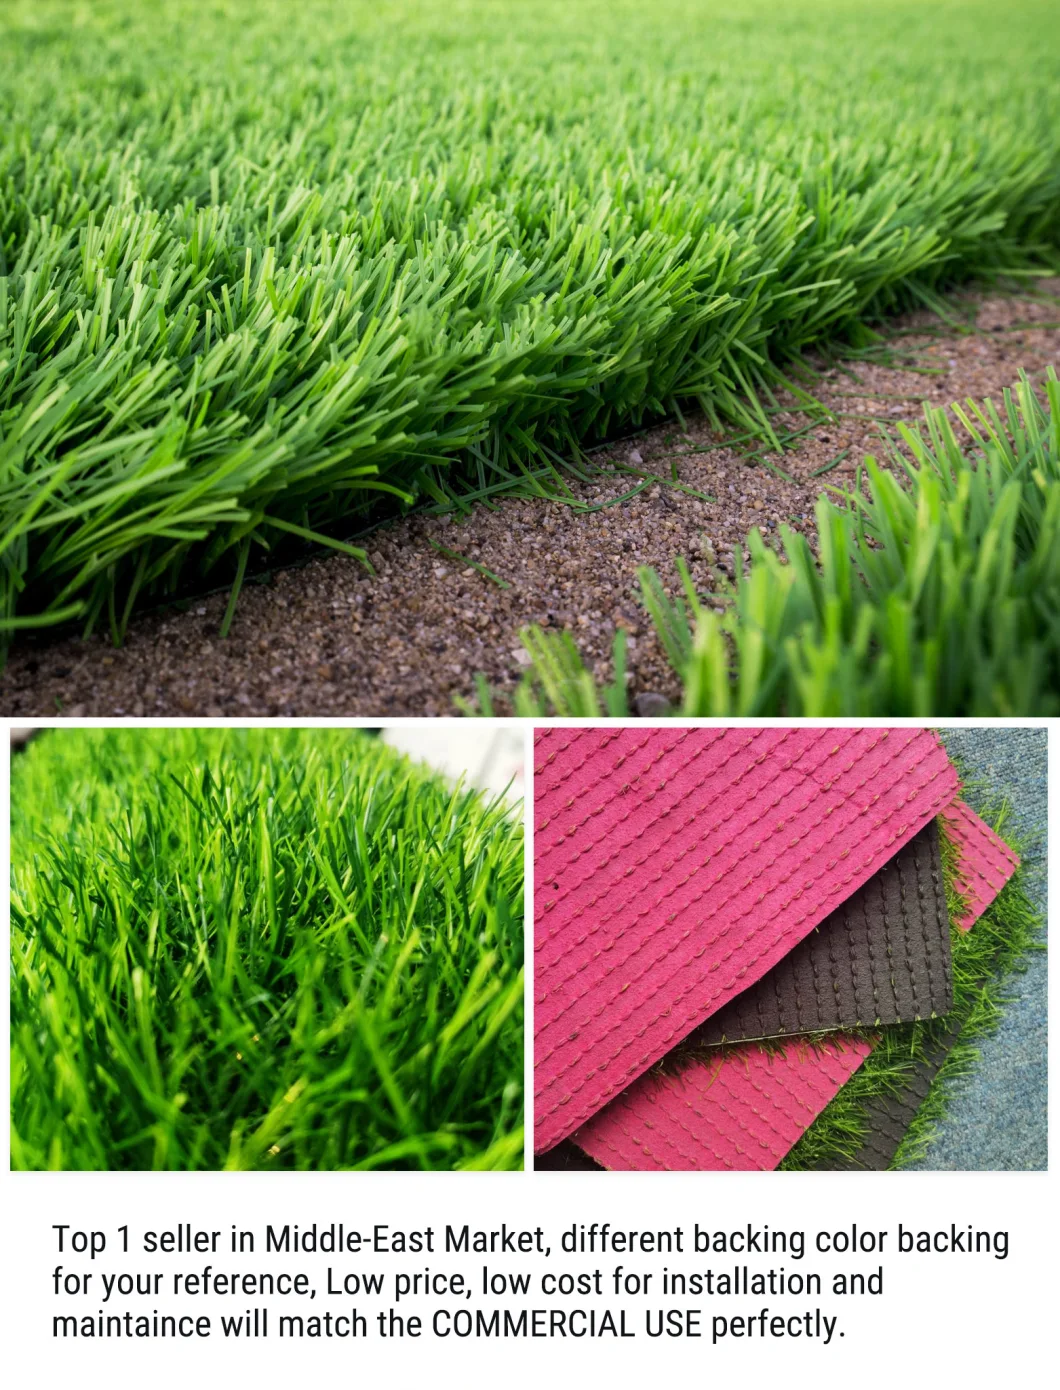 Customized Size Artificial Grass Turf Indoor Outdoor Garden Lawn Landscape Balcony Synthetic Turf Mat